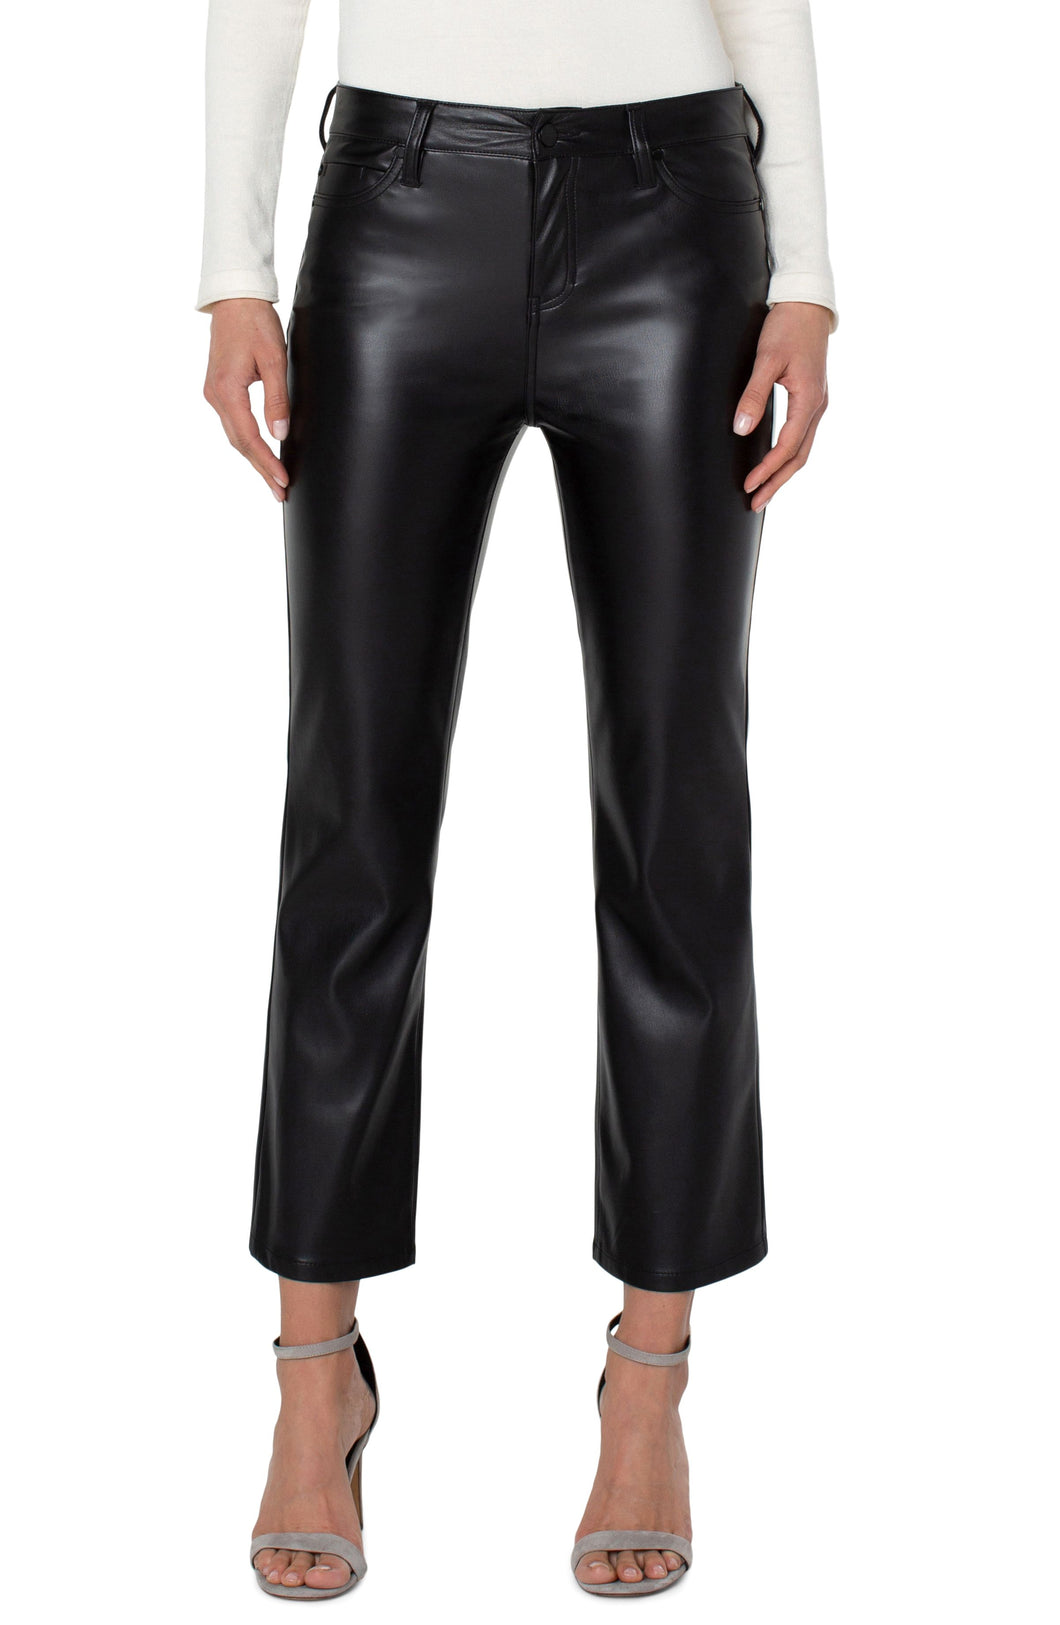 Feel great and look amazing in our Hannah Crop Flare. Our comfortable faux leather flare moves with you and offers a flattering fit. Complete your look with our Becka Black Faux Leather Seamed Shacket. Pair with heels or sneakers for a 